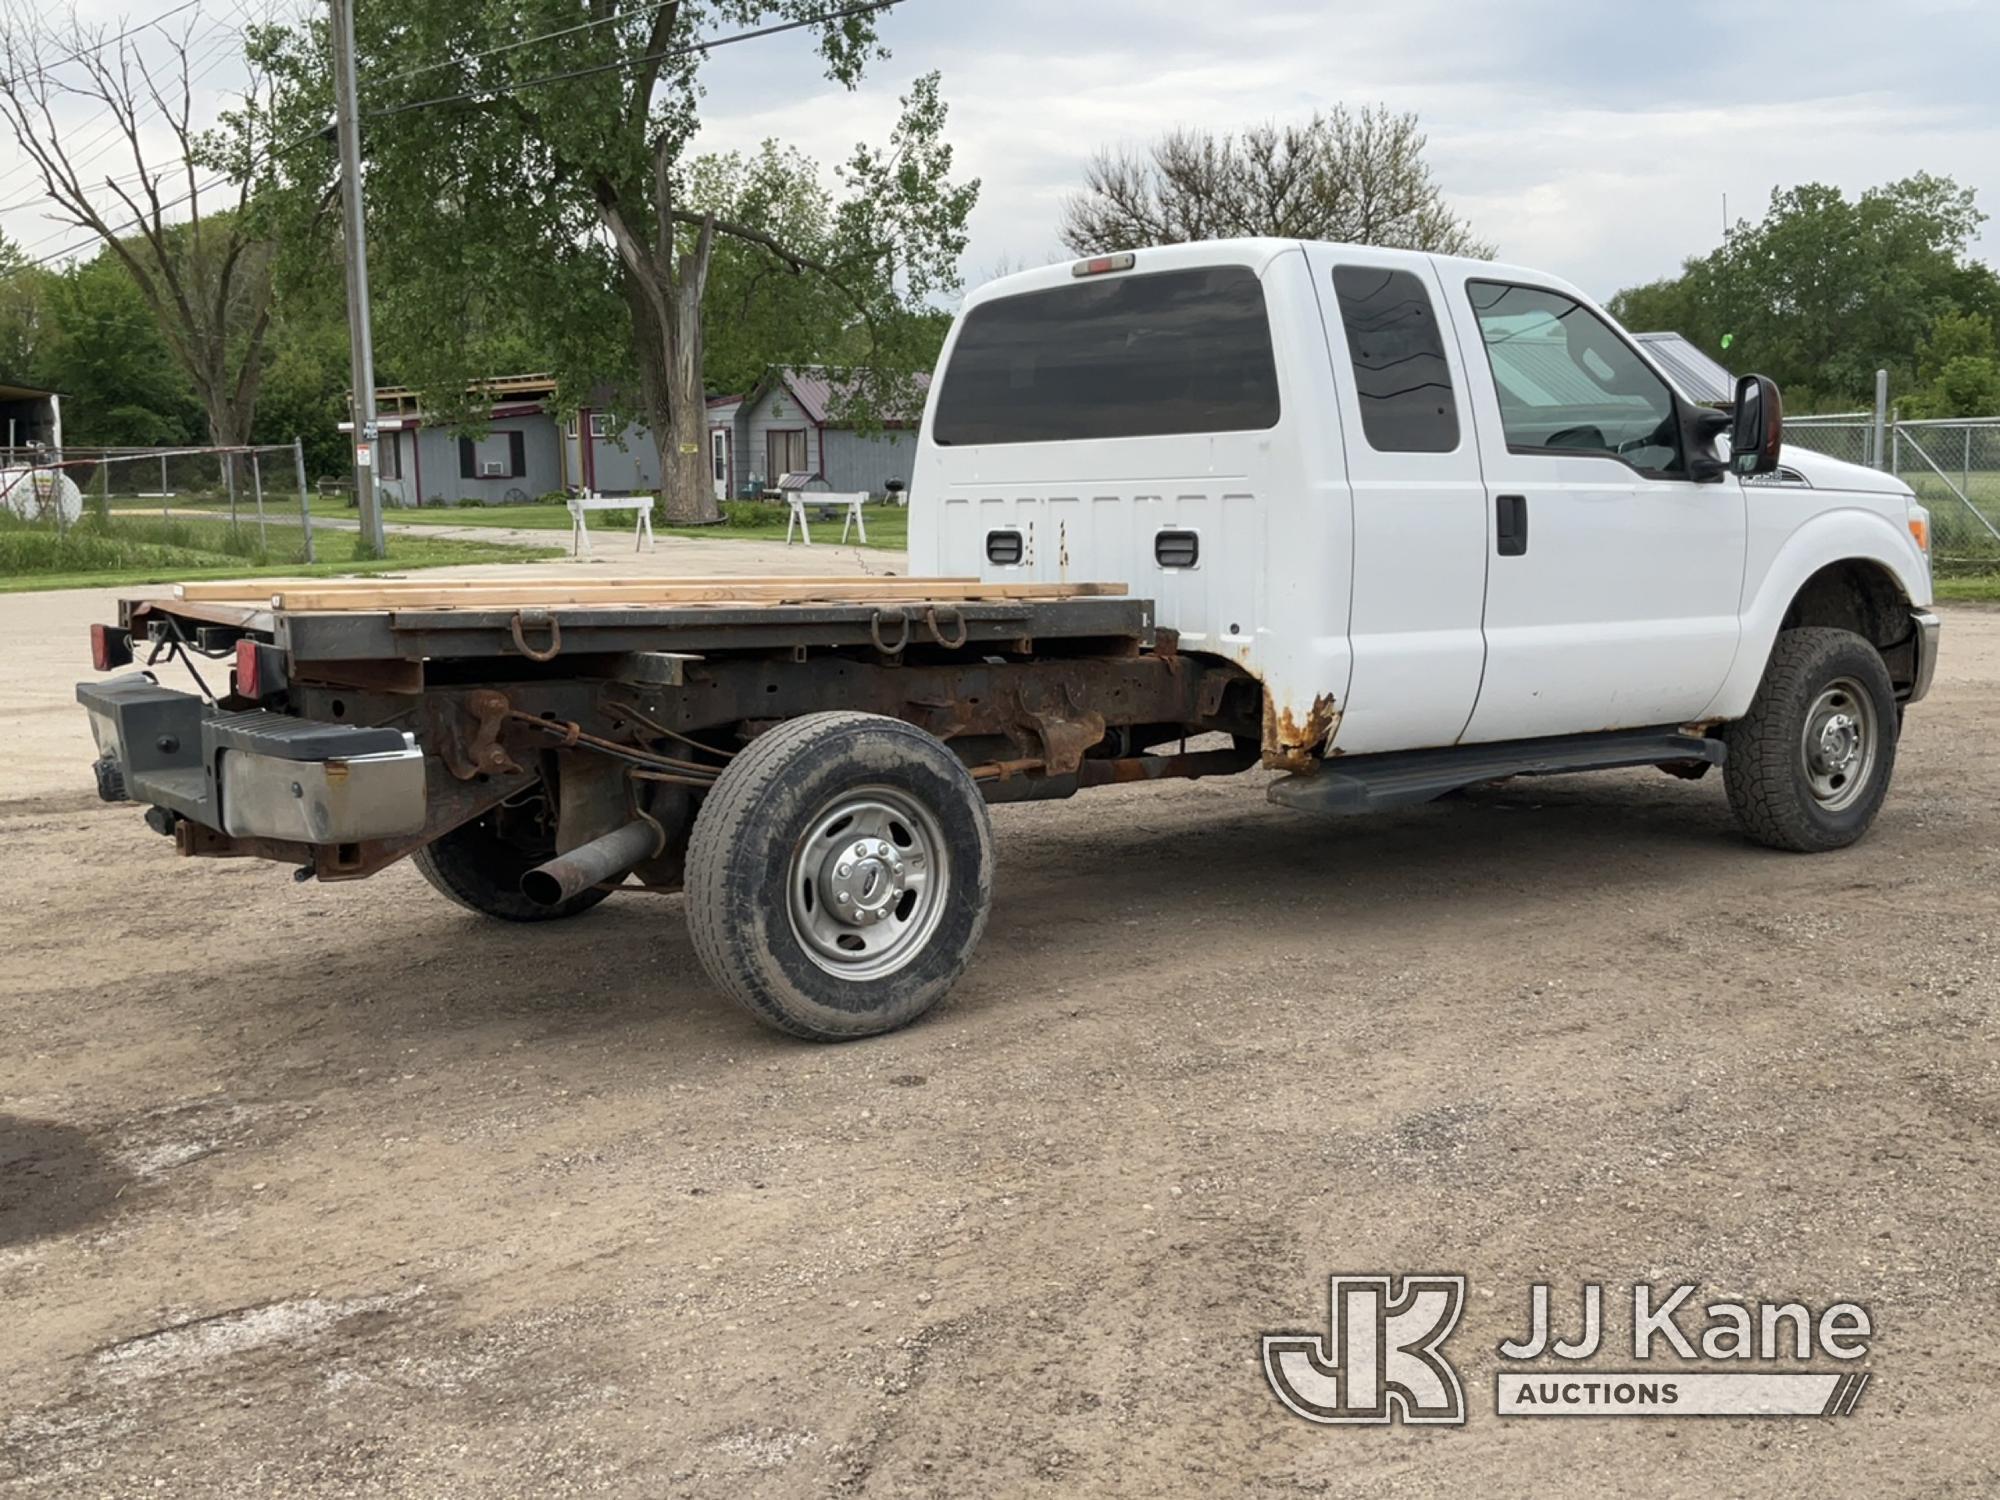 (South Beloit, IL) 2011 Ford F350 4x4 Extended-Cab Pickup Truck Runs, Moves, Rust Damage, Paint Dama